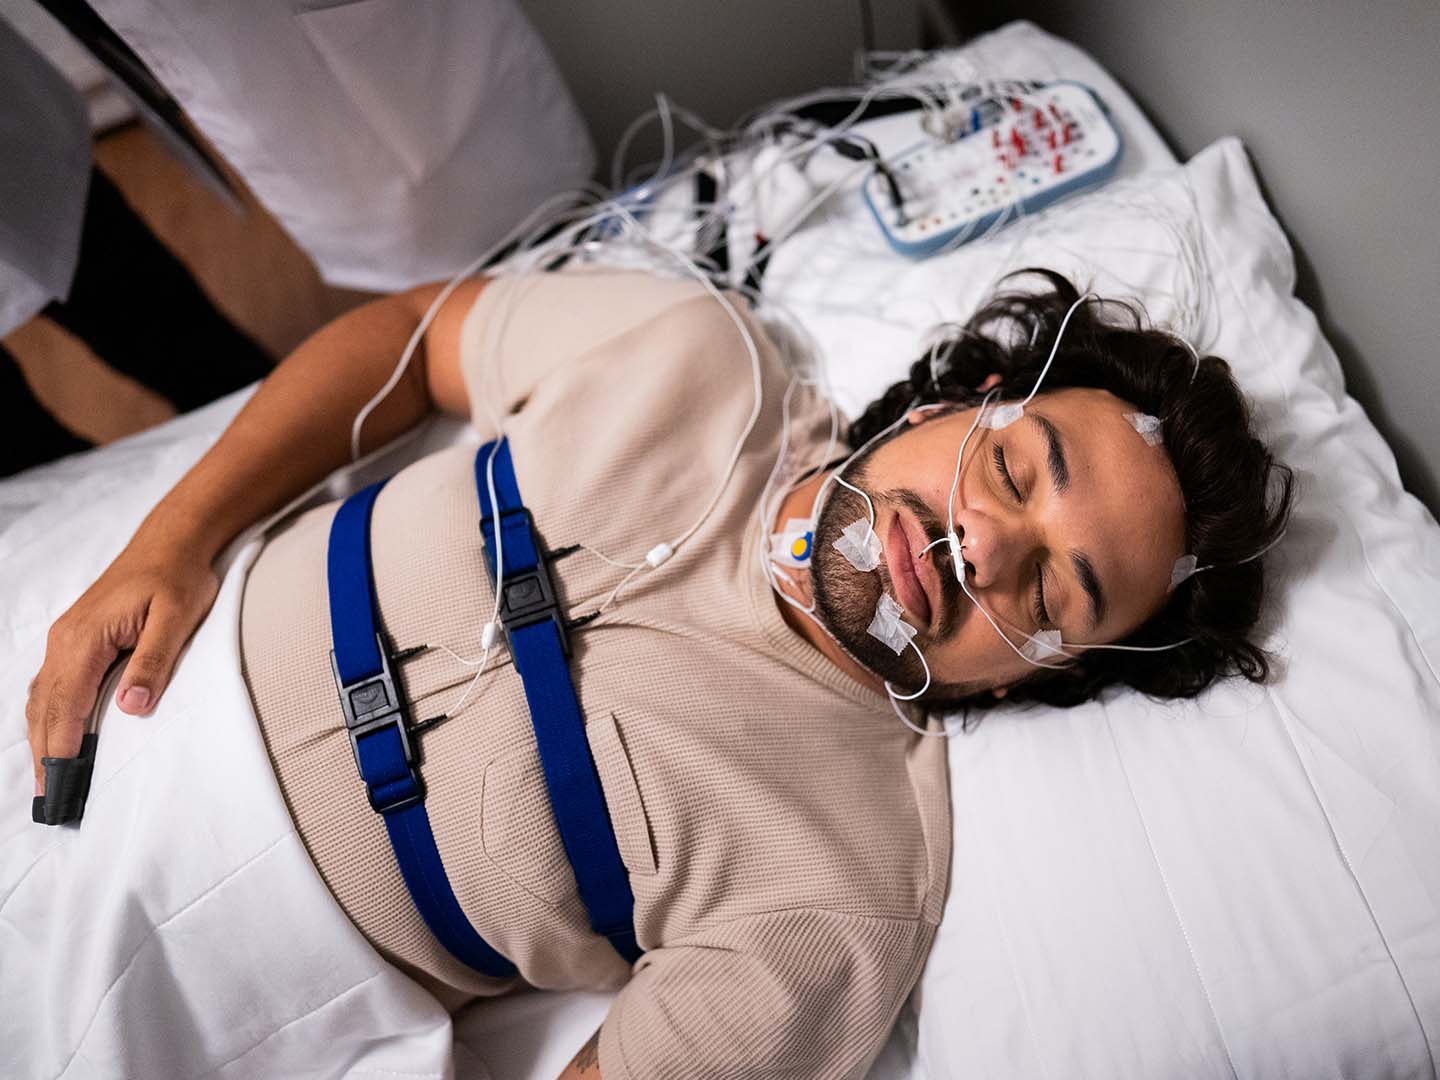 A person is undergoing a sleep study, connected to various sensors and equipment designed to monitor physiological functions while lying in a medical bed.